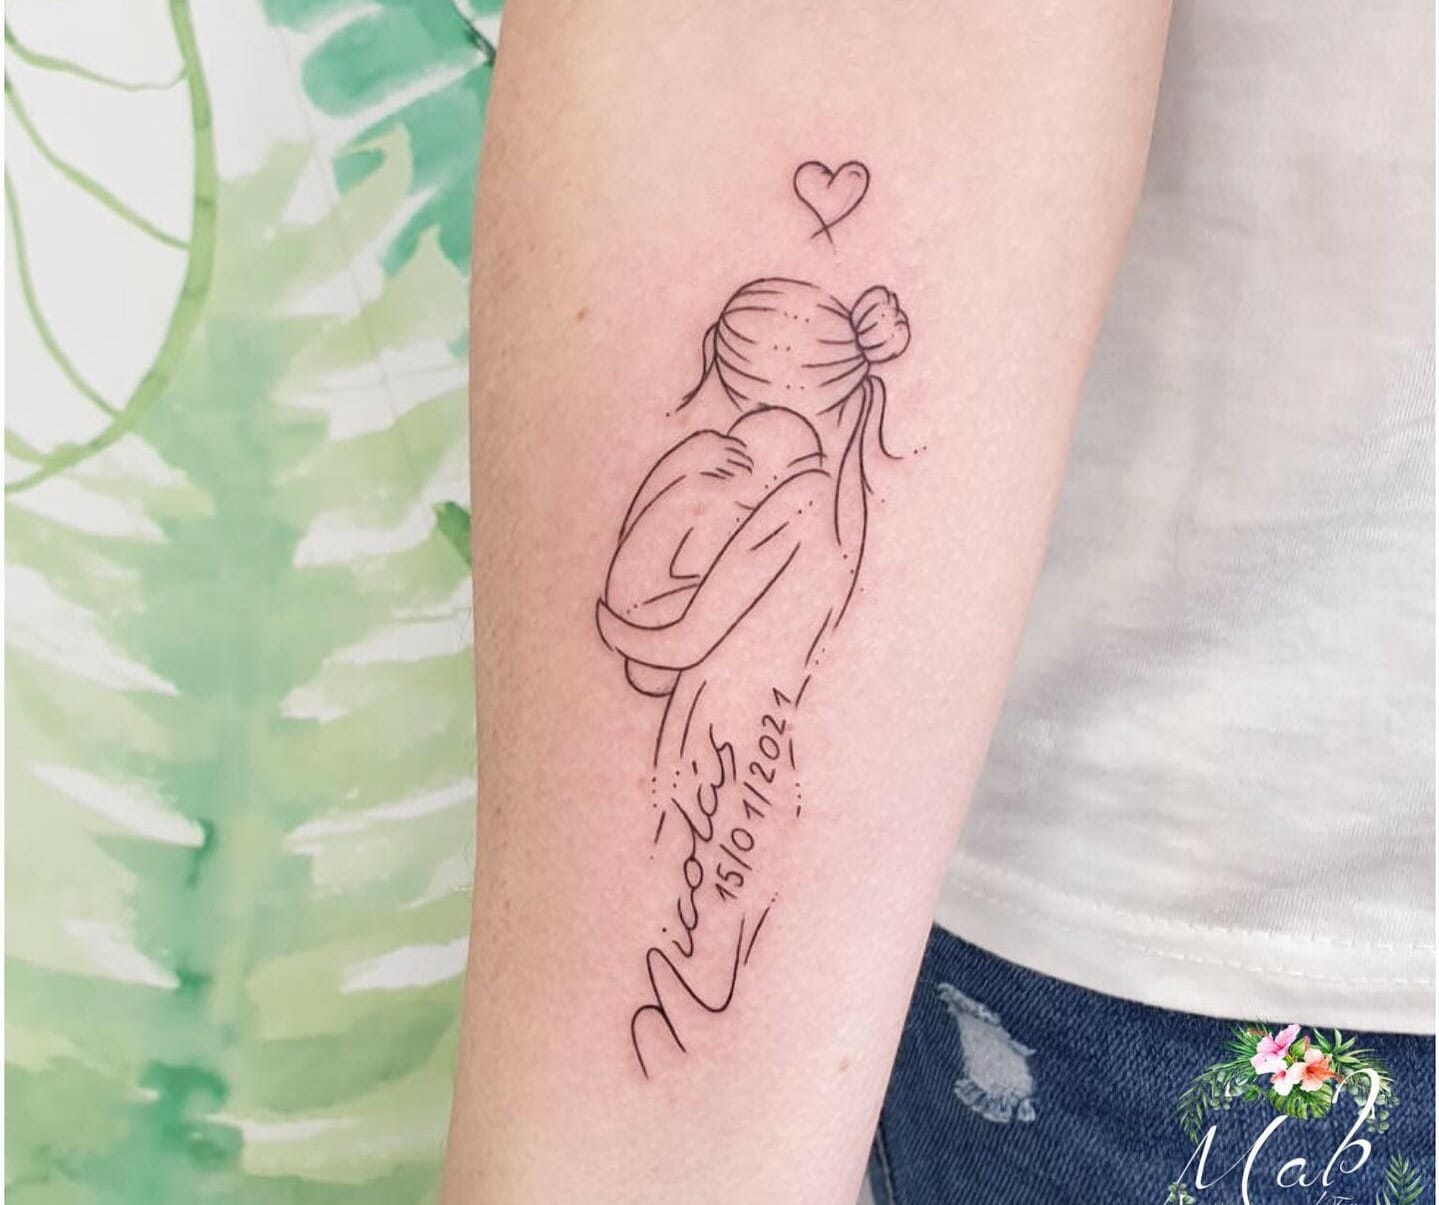 Tattoo Ideas for Mothers With Sons 10 Creative Designs